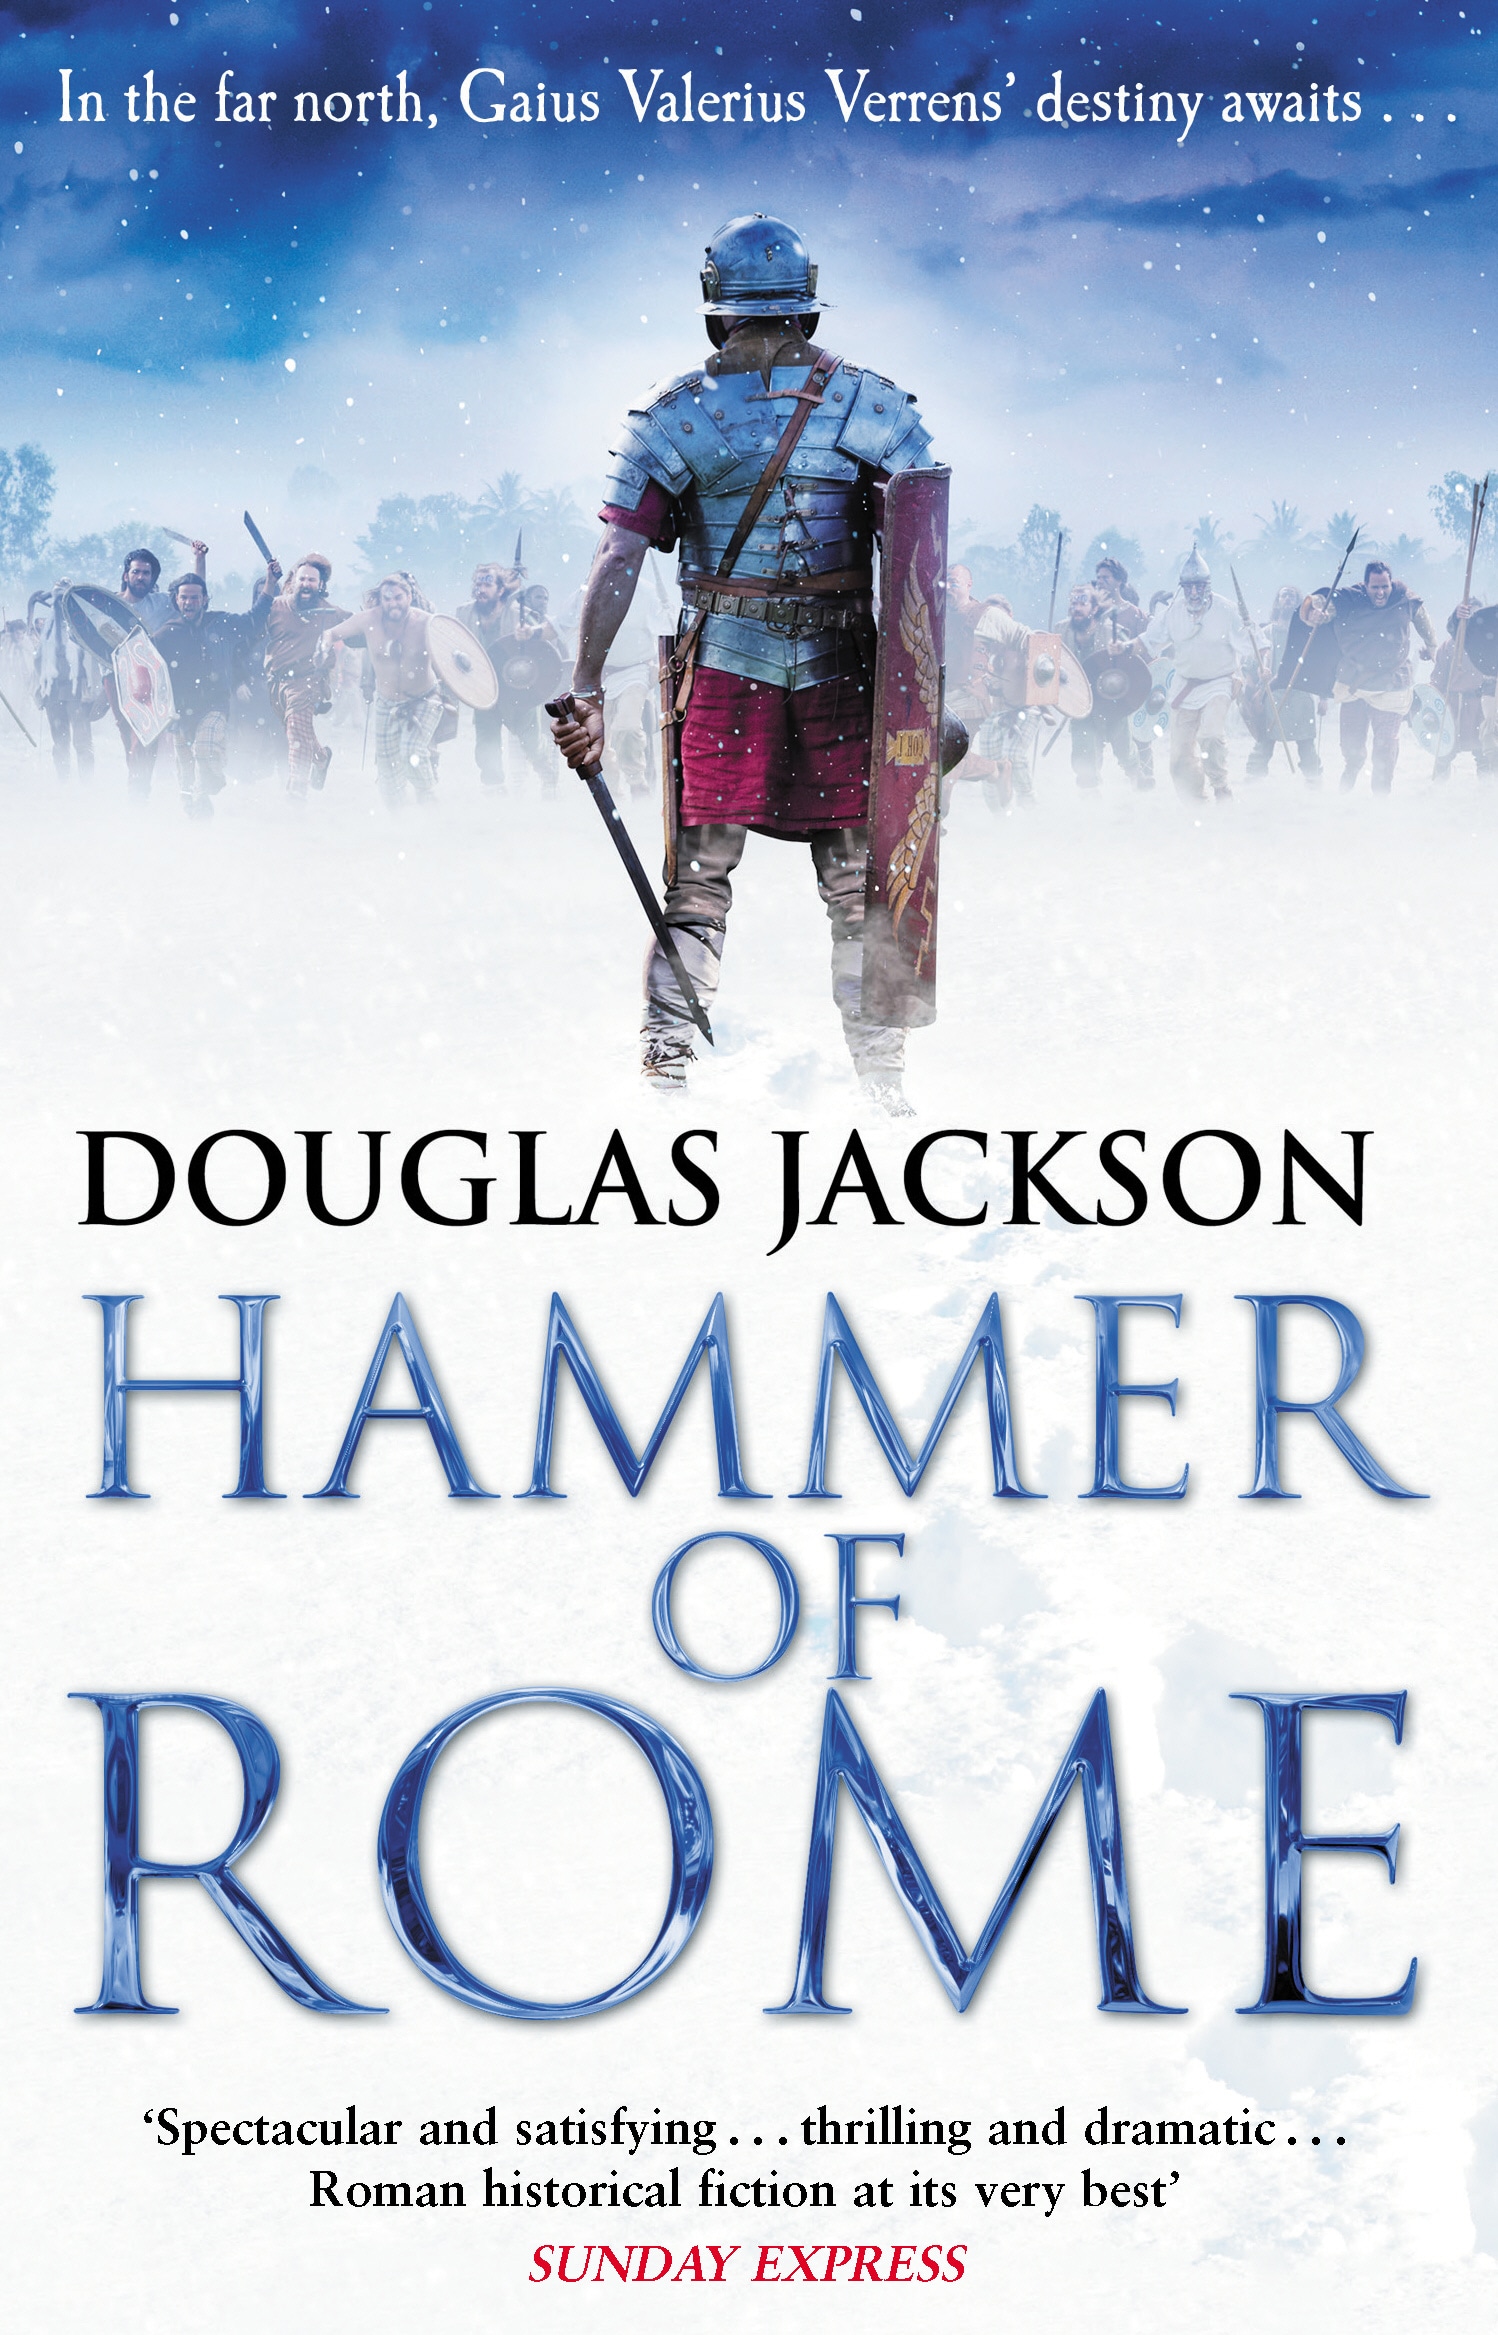 Book “Hammer of Rome” by Douglas Jackson — July 11, 2019